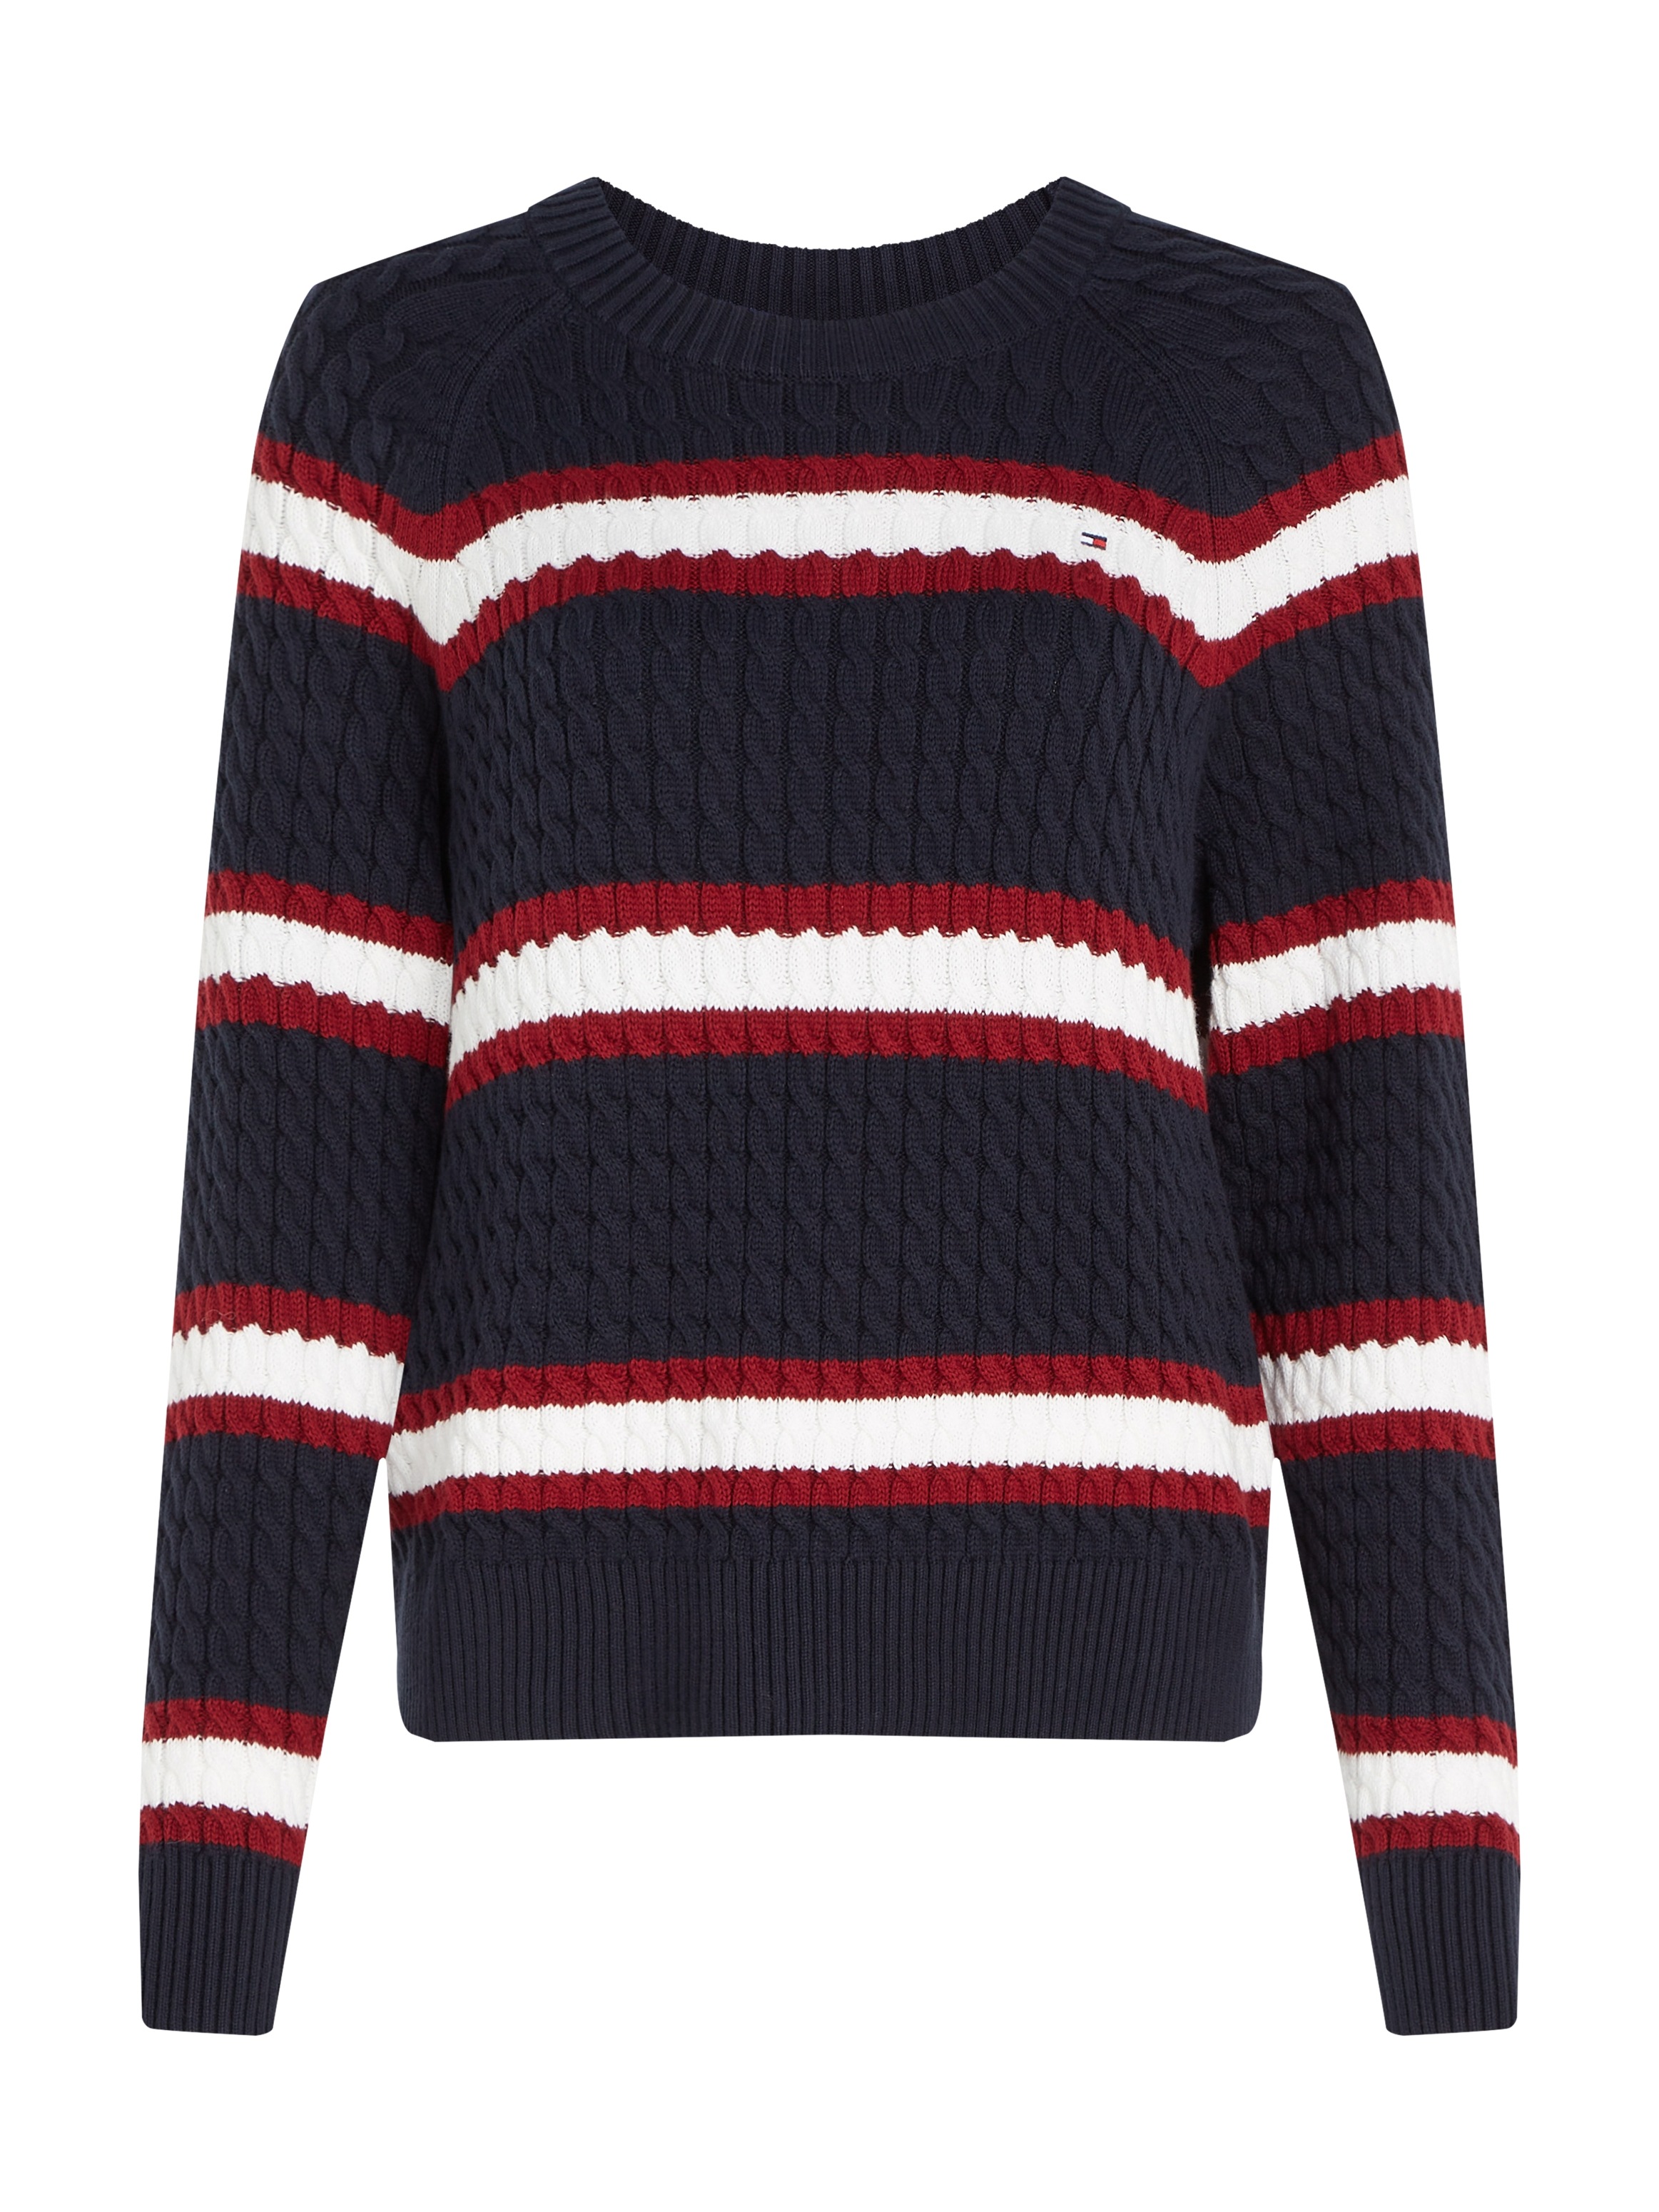 OTTOversand mit bei SWEATER«, CABLE MINI Strickpullover Tommy »CO C-NECK Logostickerei Hilfiger